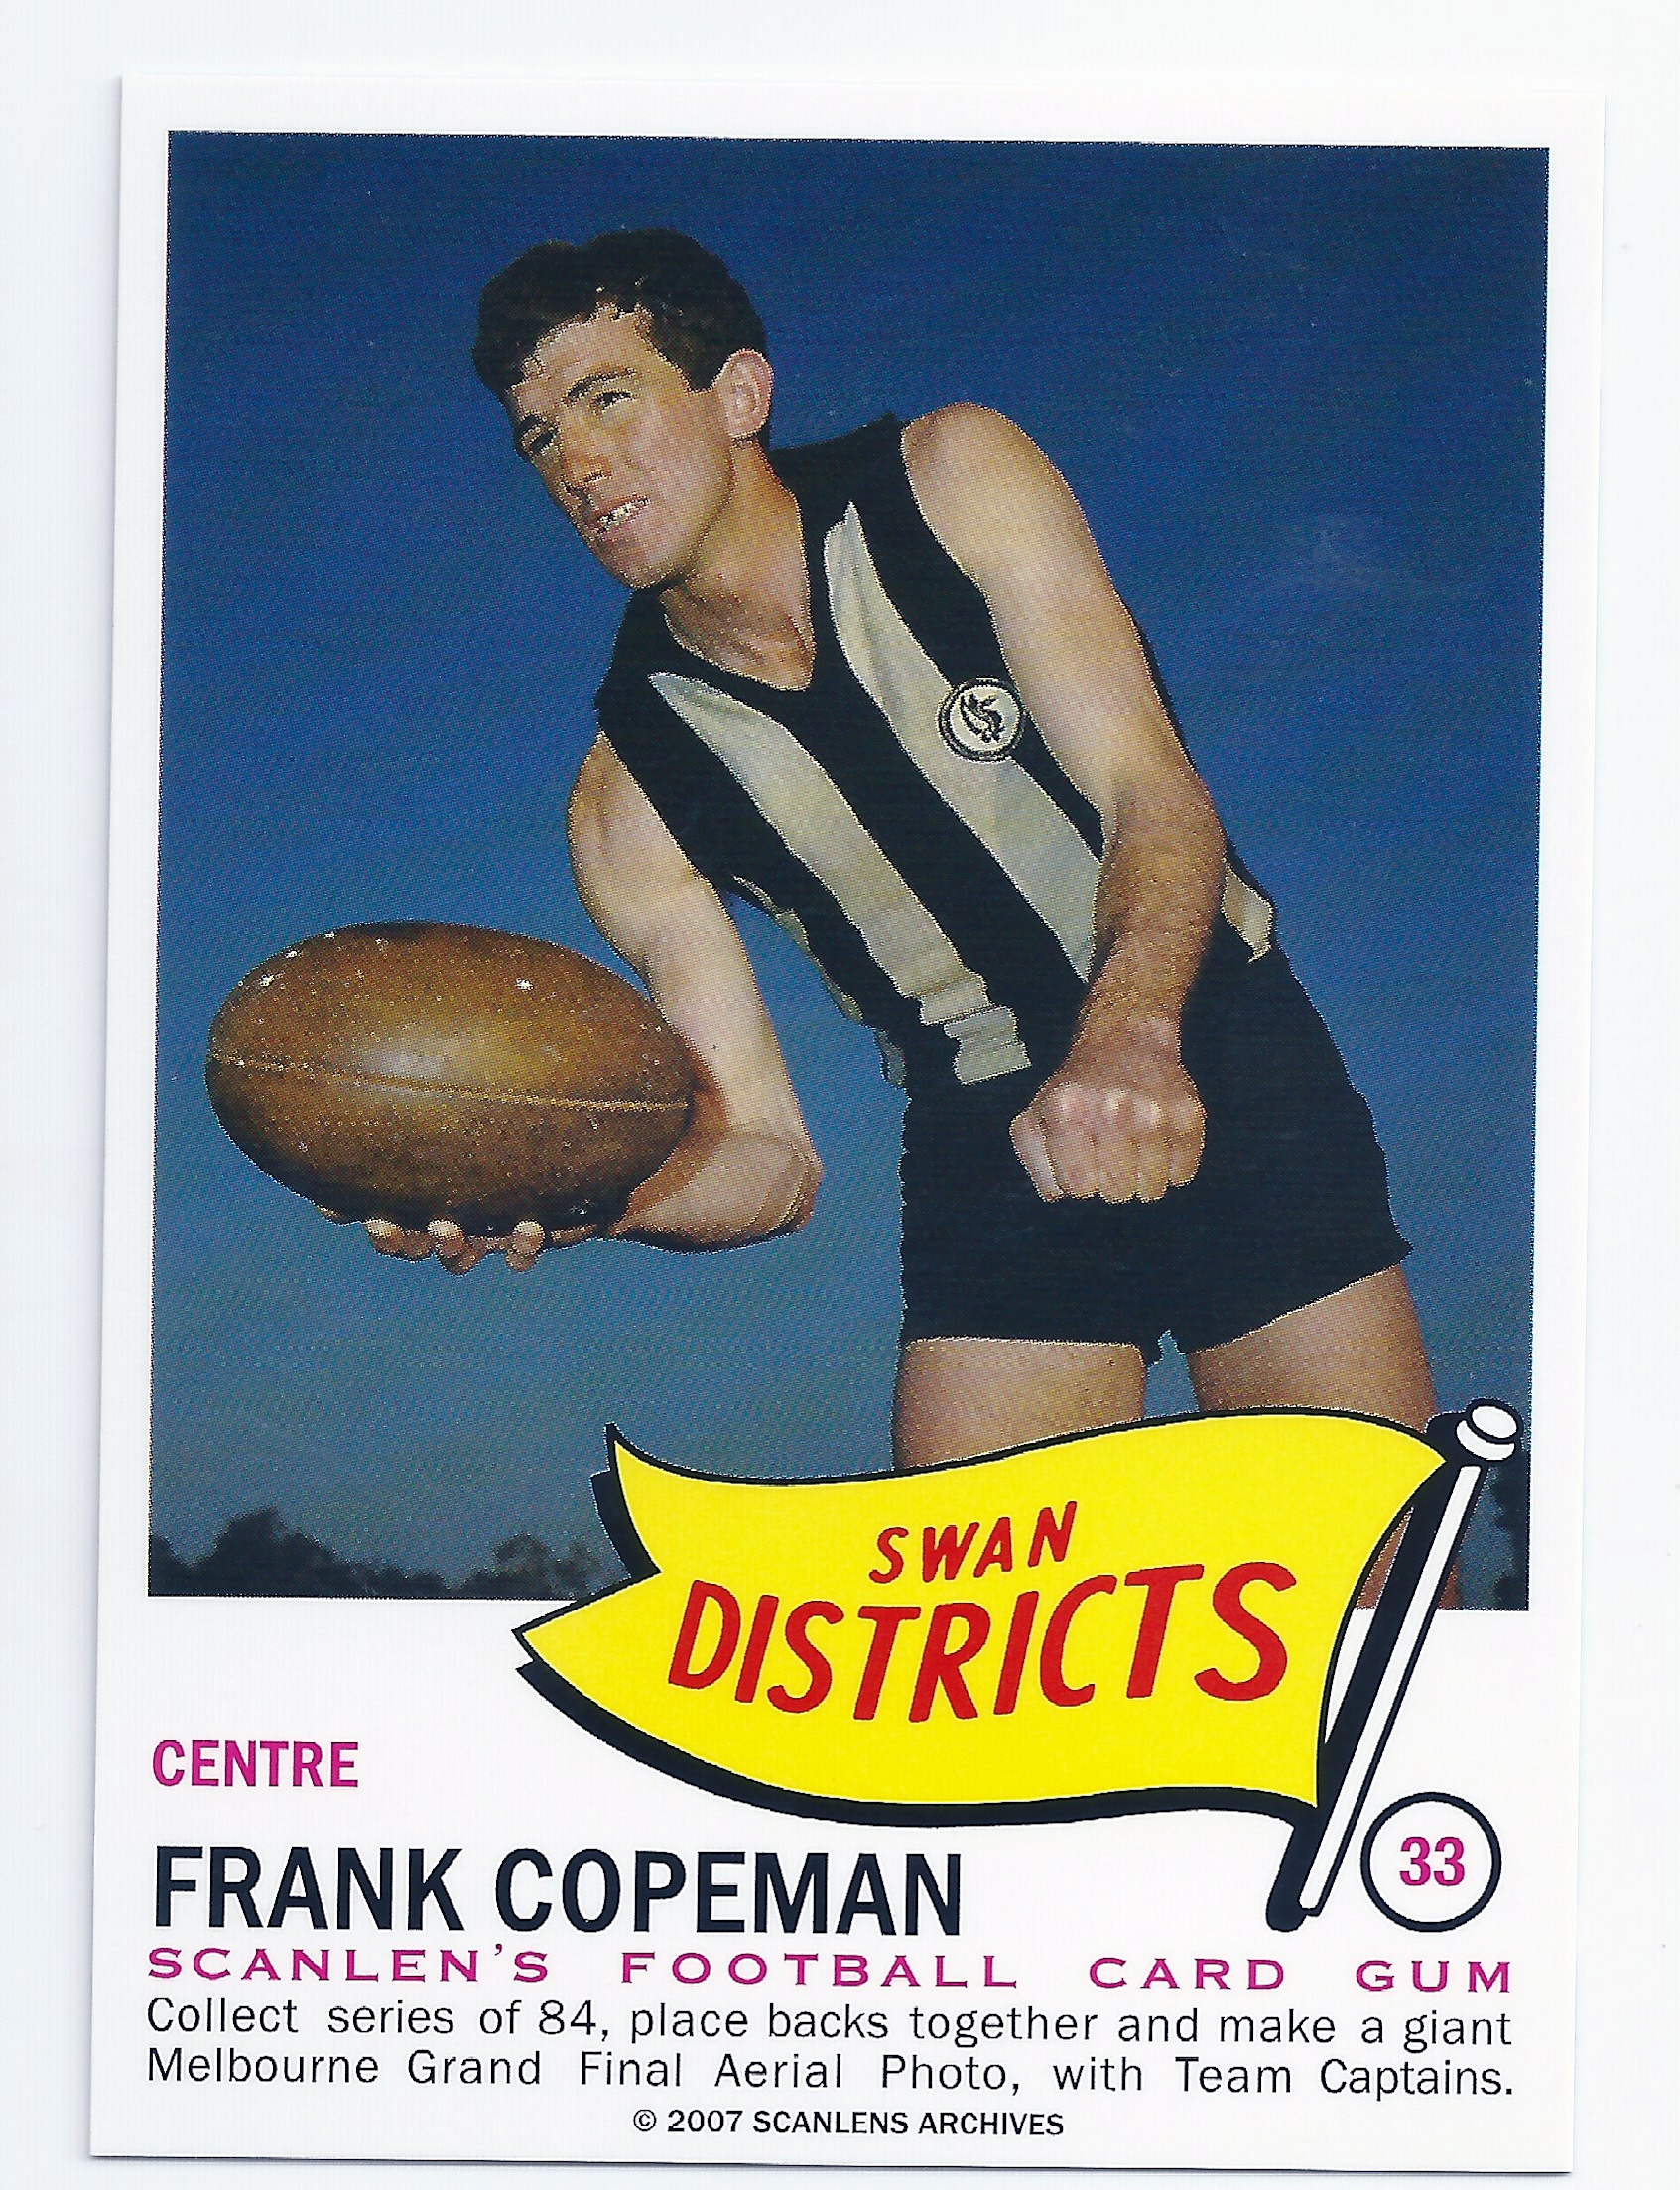 2007 – 1966 Scanlens Flag Archives (33) Frank Copeman Swan Districts